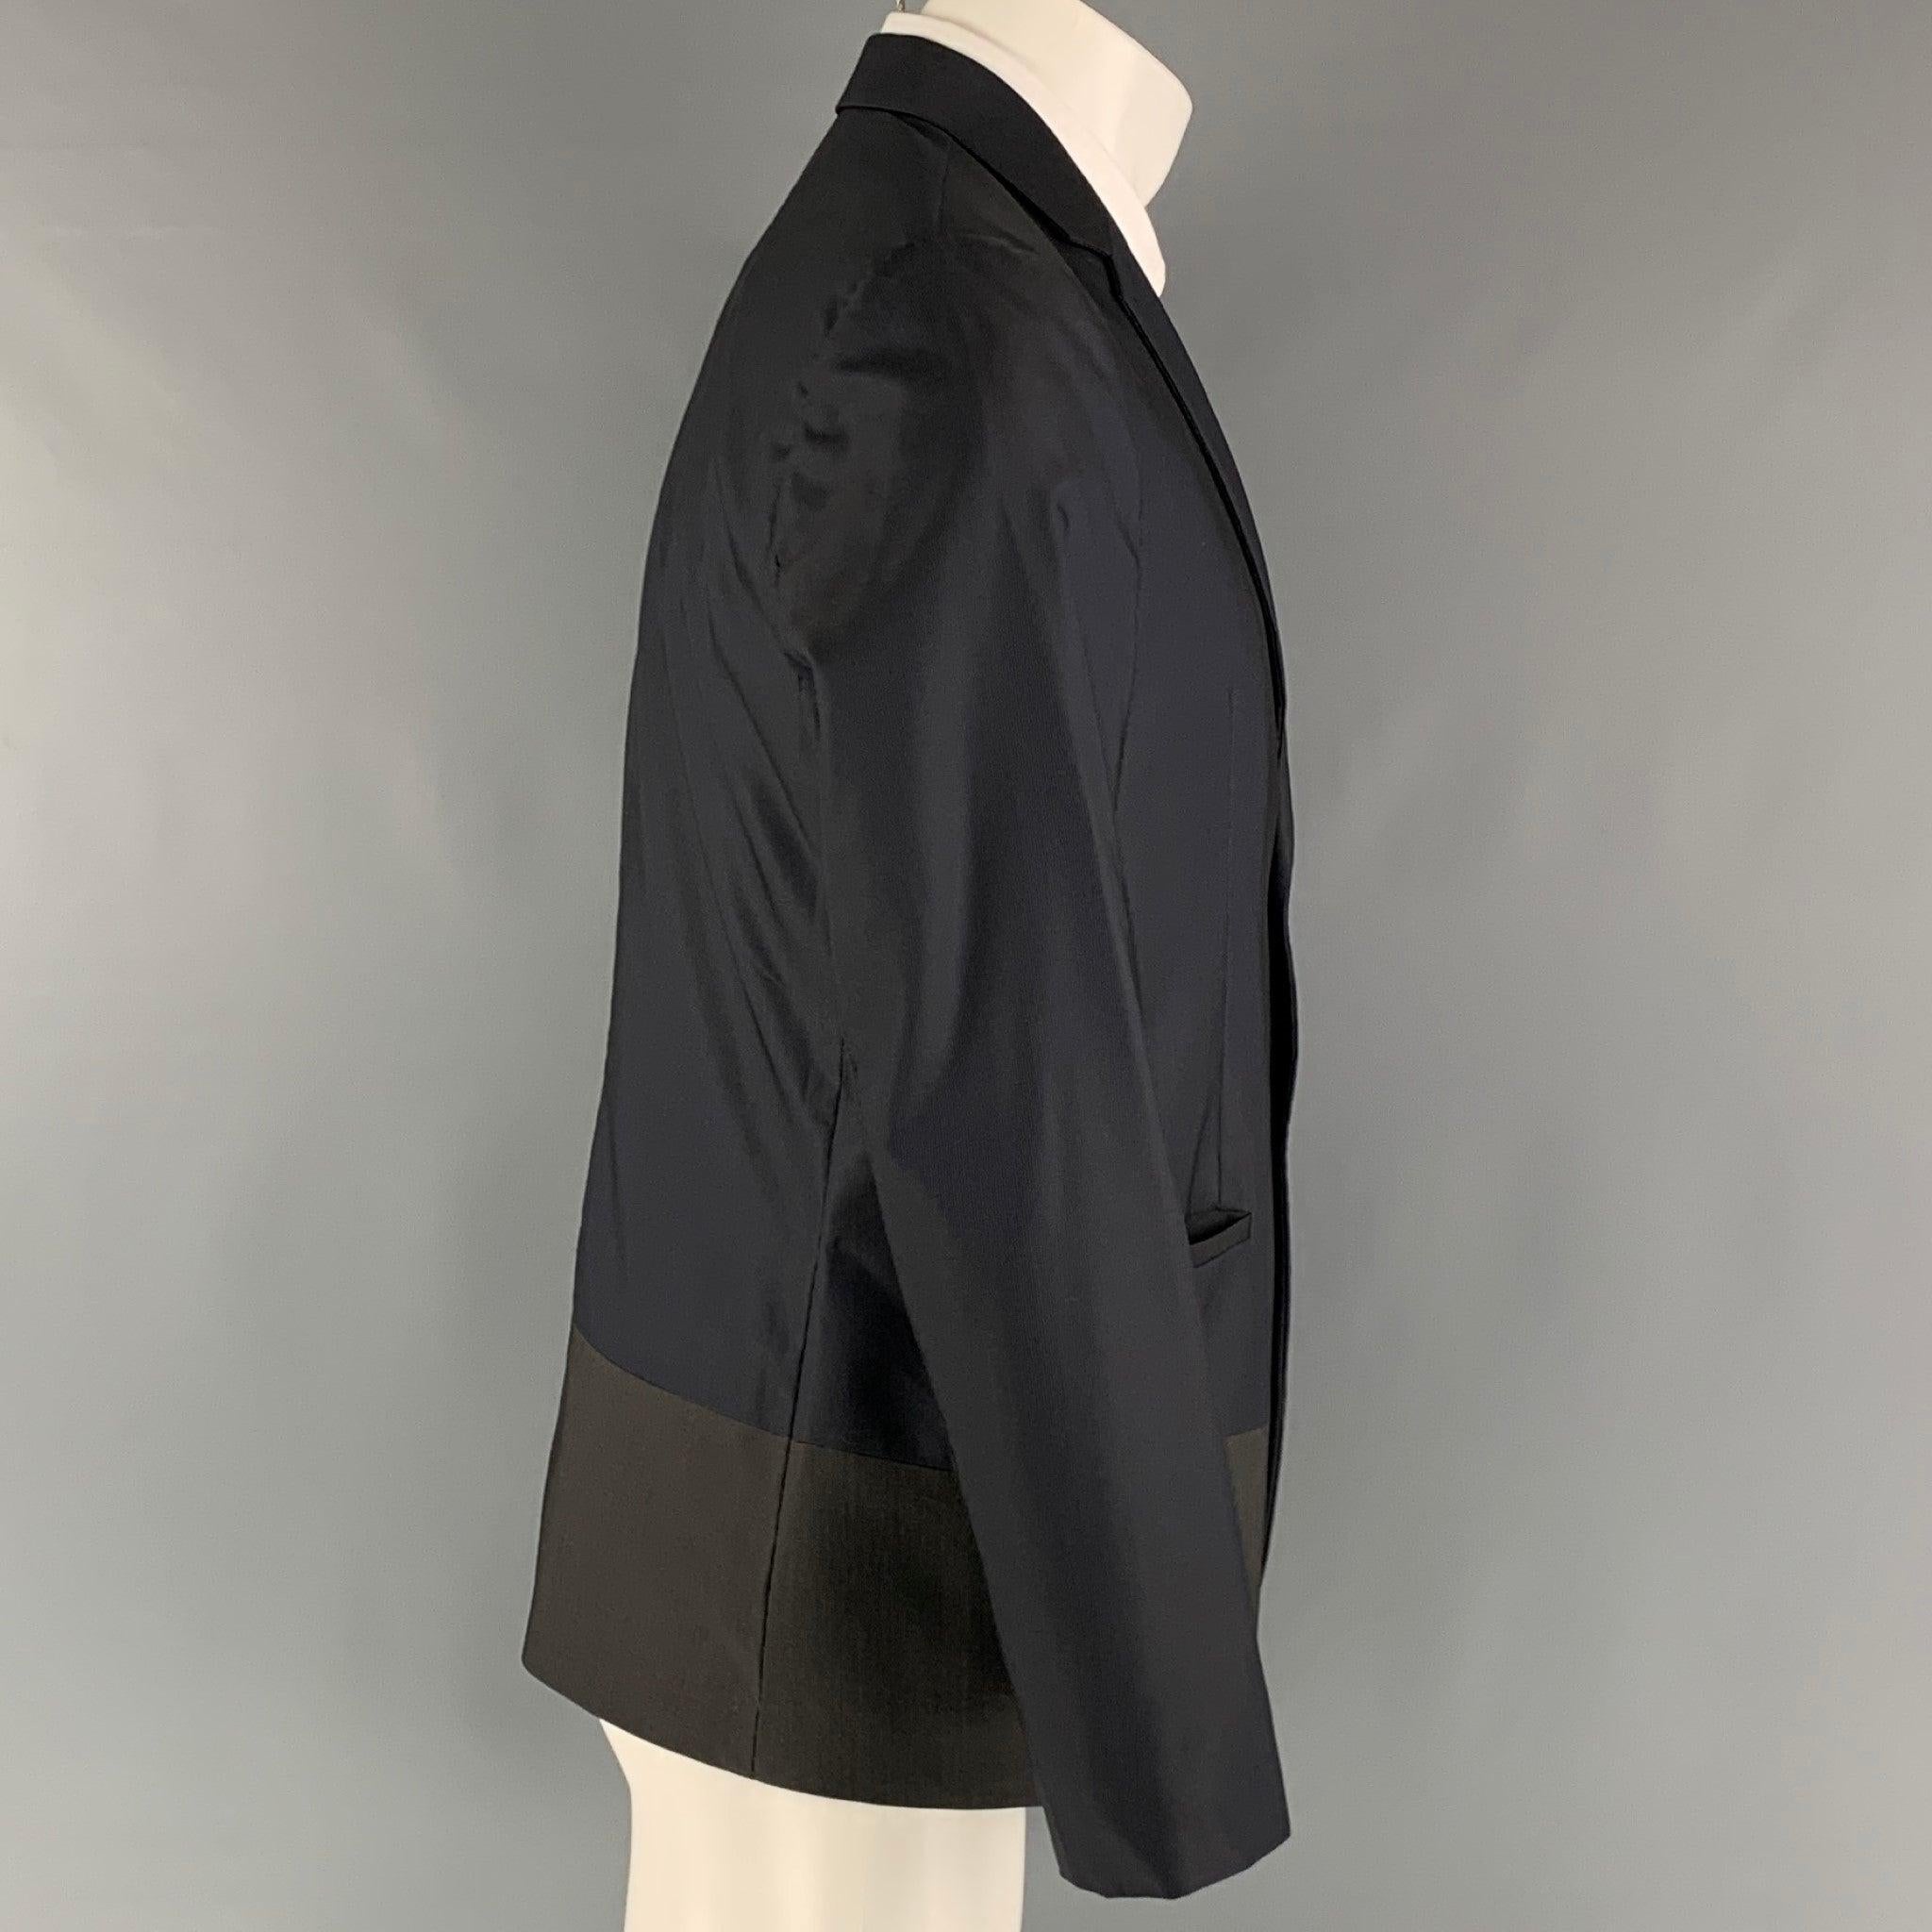 EMPORIO ARMANI sport coat comes in a navy and olive woven material with full lining featuring a color block aesthetic, notch lapel, welt pockets, and a two button closure. Made in Italy.Excellent Pre-Owned Condition. 

Marked:   IT 48